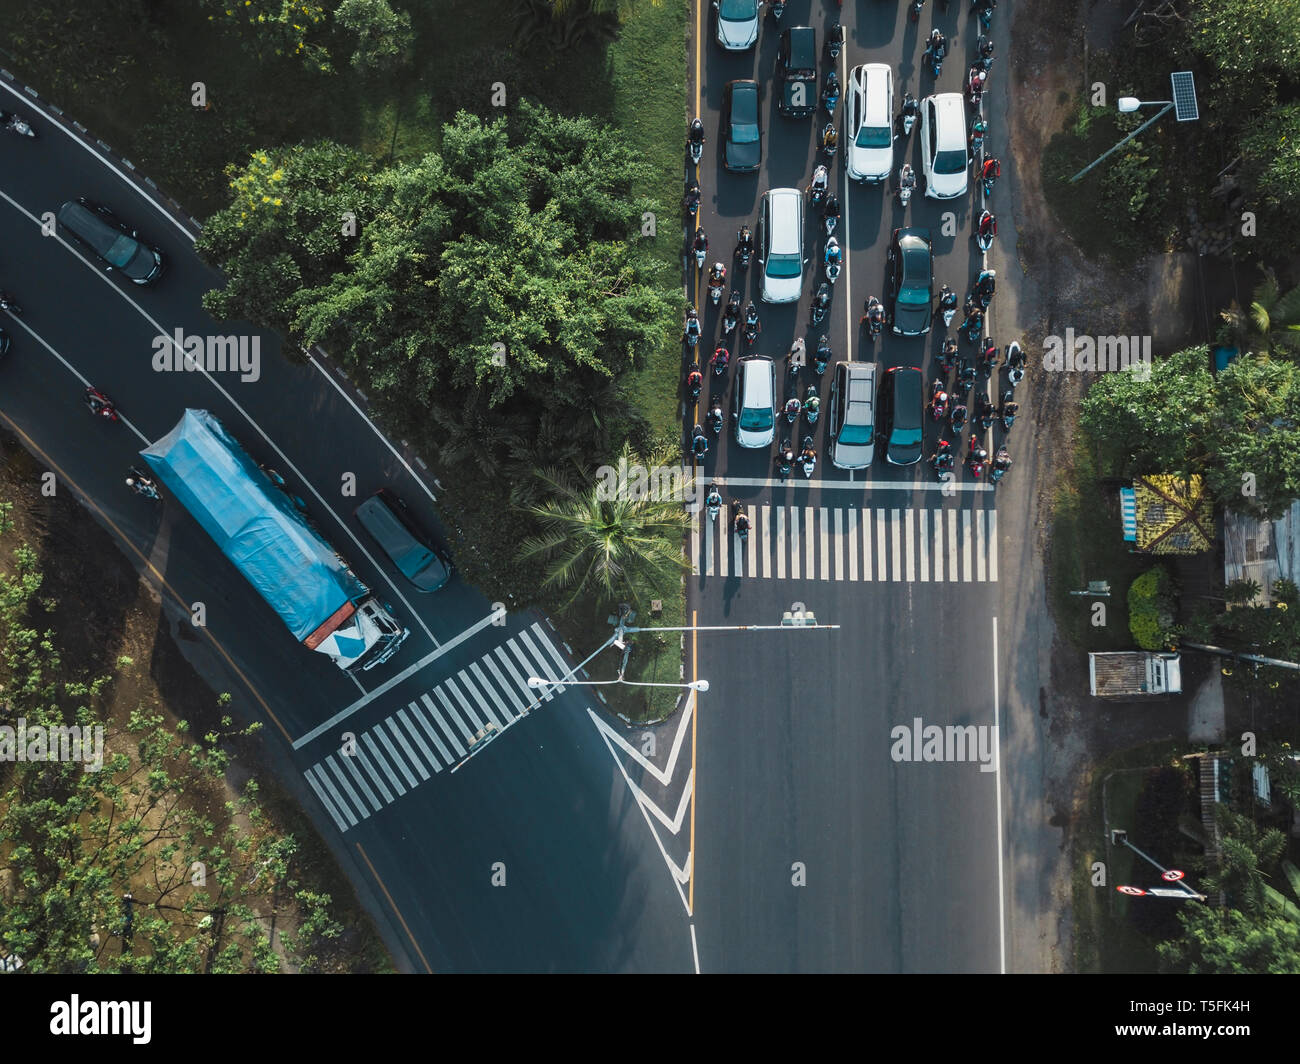 Indonesia, Bali, Sanur, Aerial view of cars, motorbikes and a truck on the road Stock Photo